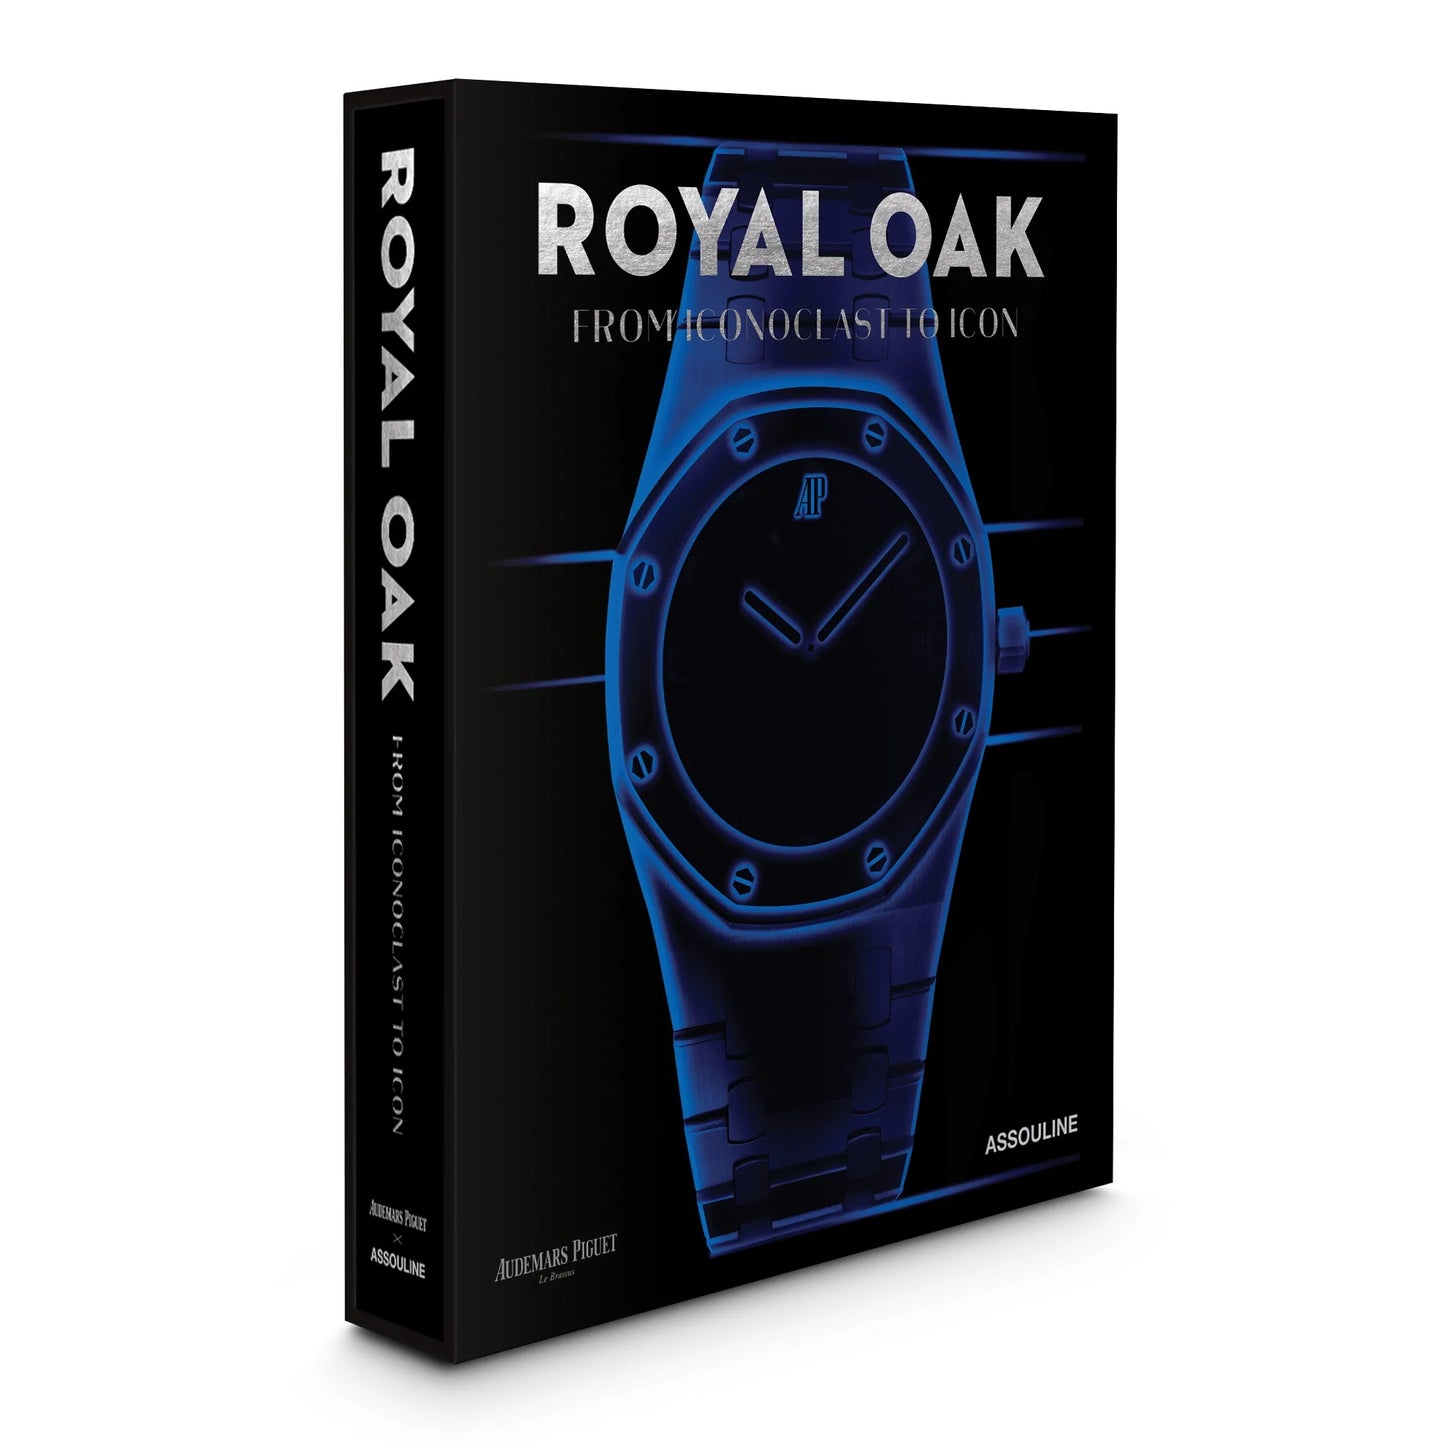 Book Royal Oak: From Iconoclast to Icon